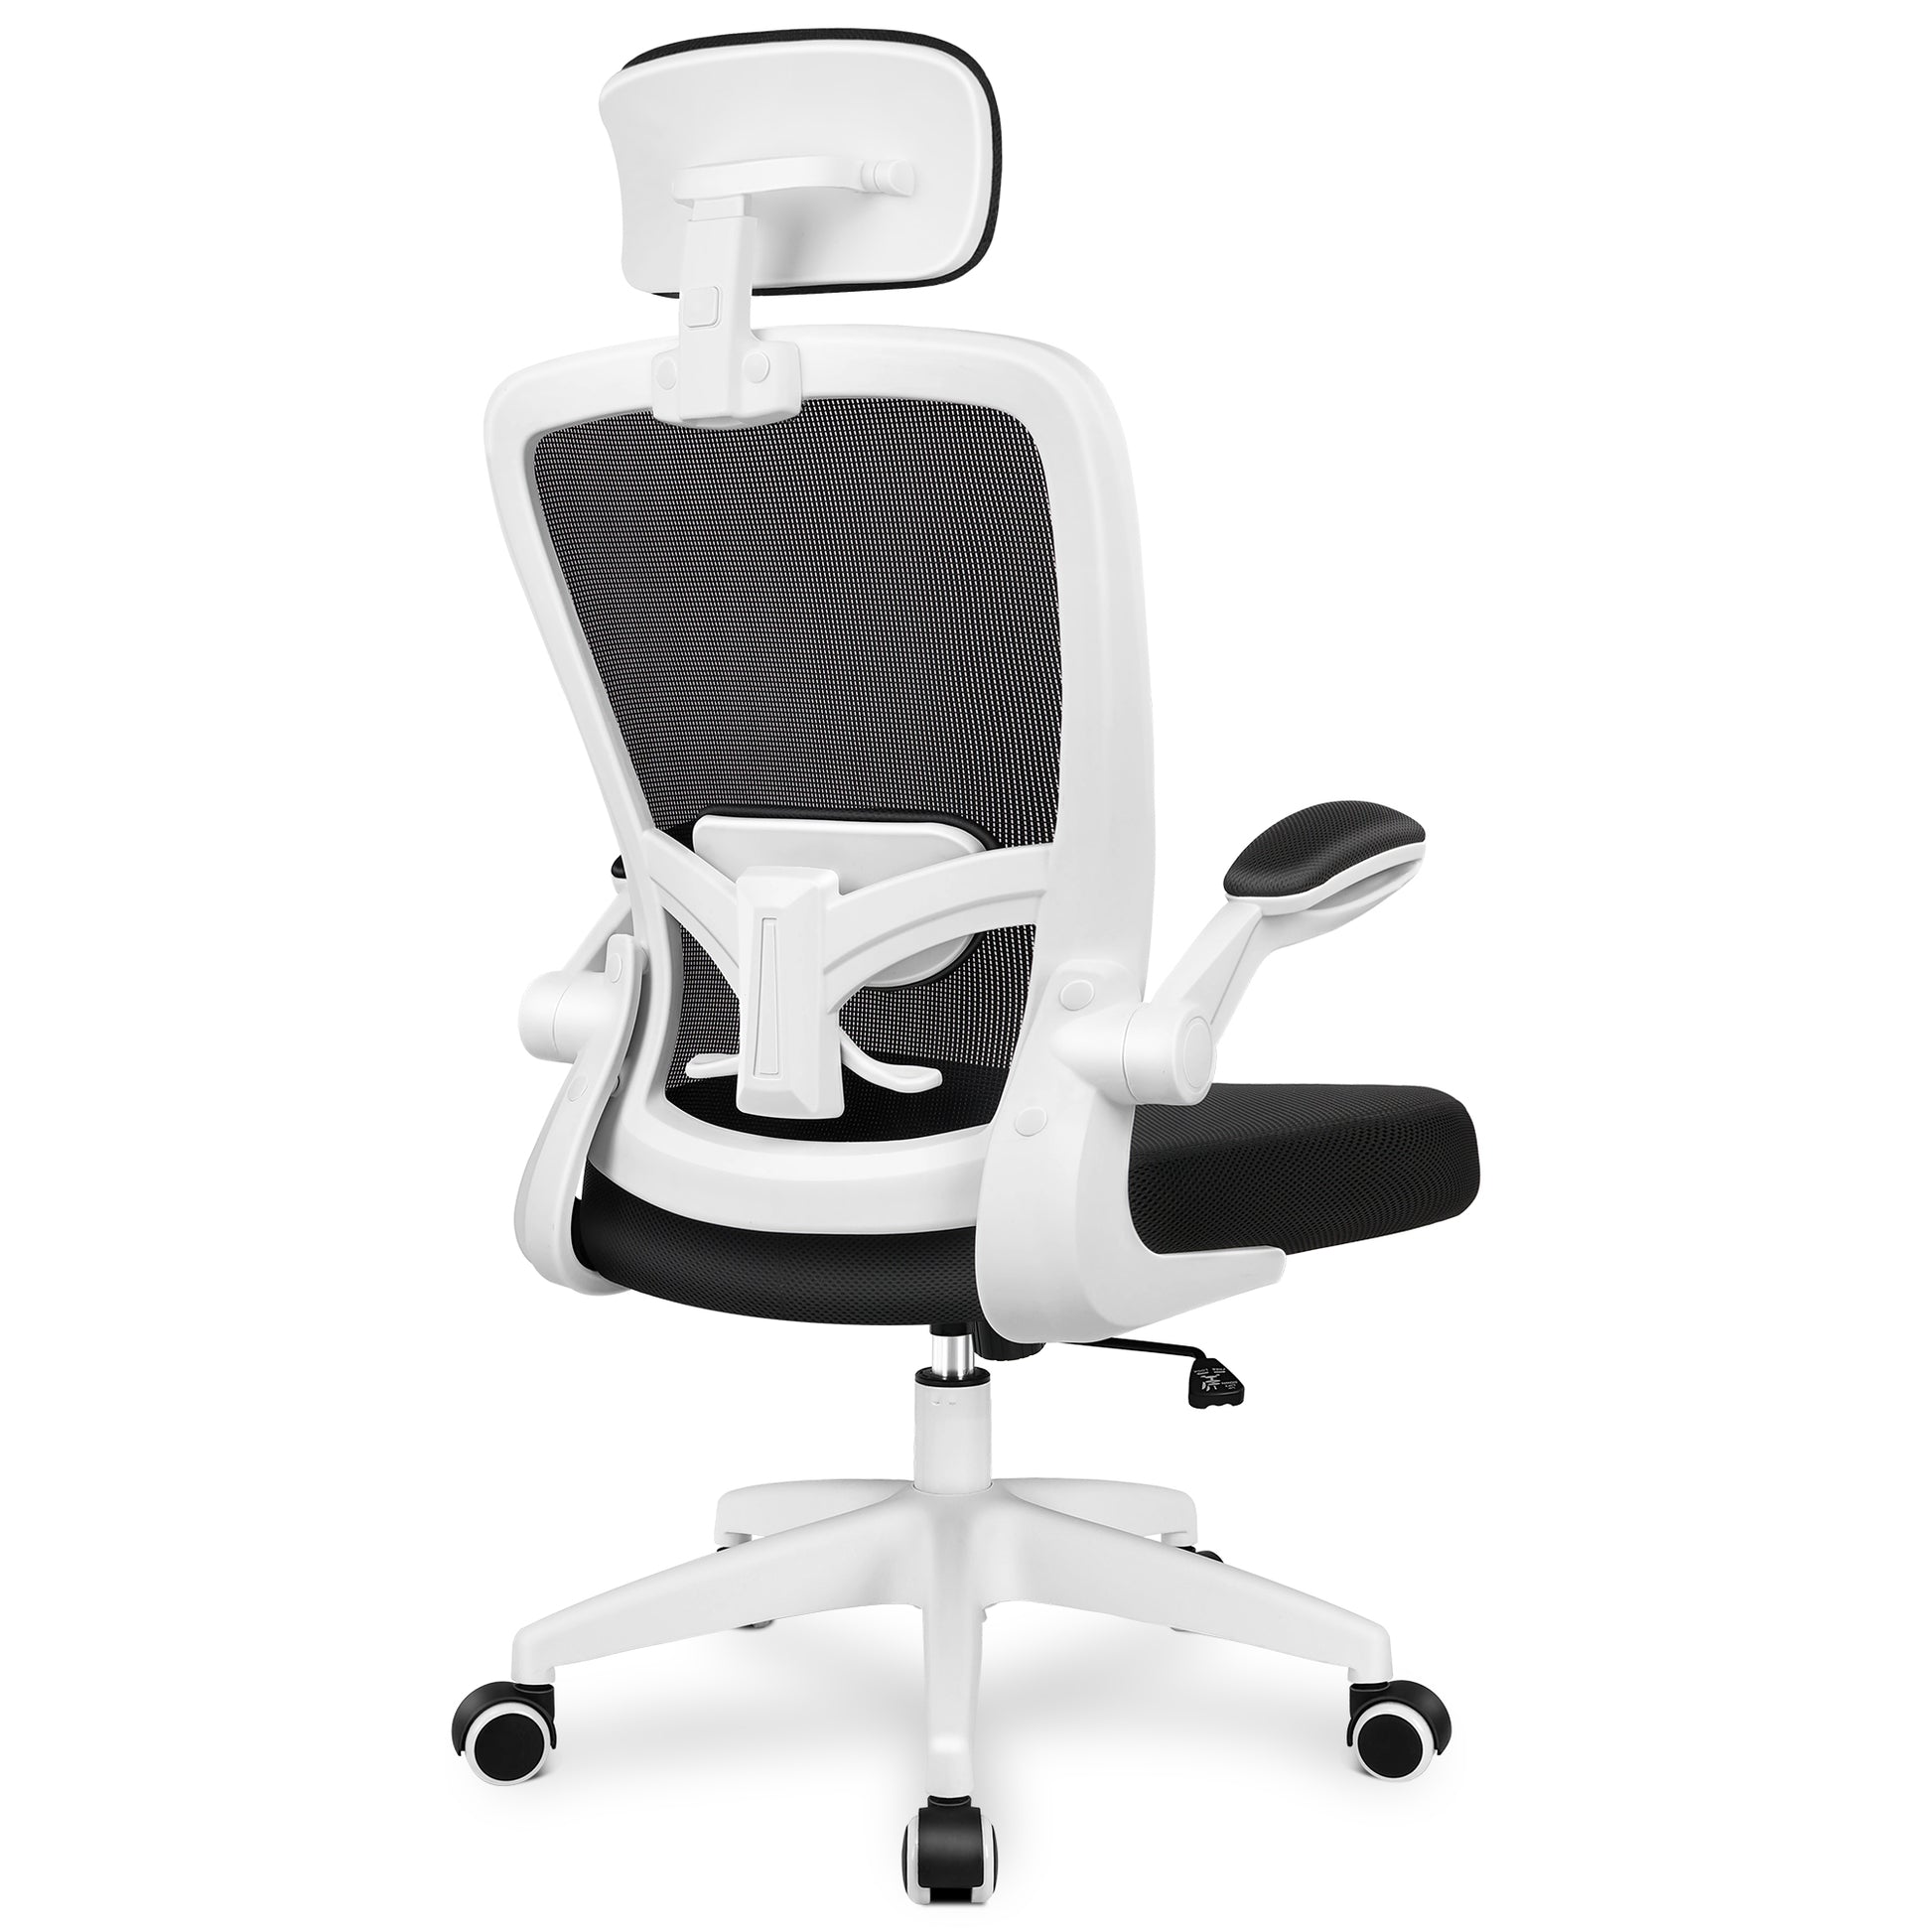 Daccormax Office Chair, Ergonomic, Comfortable Mesh Executive Chair,  Adjustable Lumbar Support, Headrest, Armrests, Rocker Function, Desk Chair,  Computer Chair, Home Office Chair up to 200 kg : : Home & Kitchen